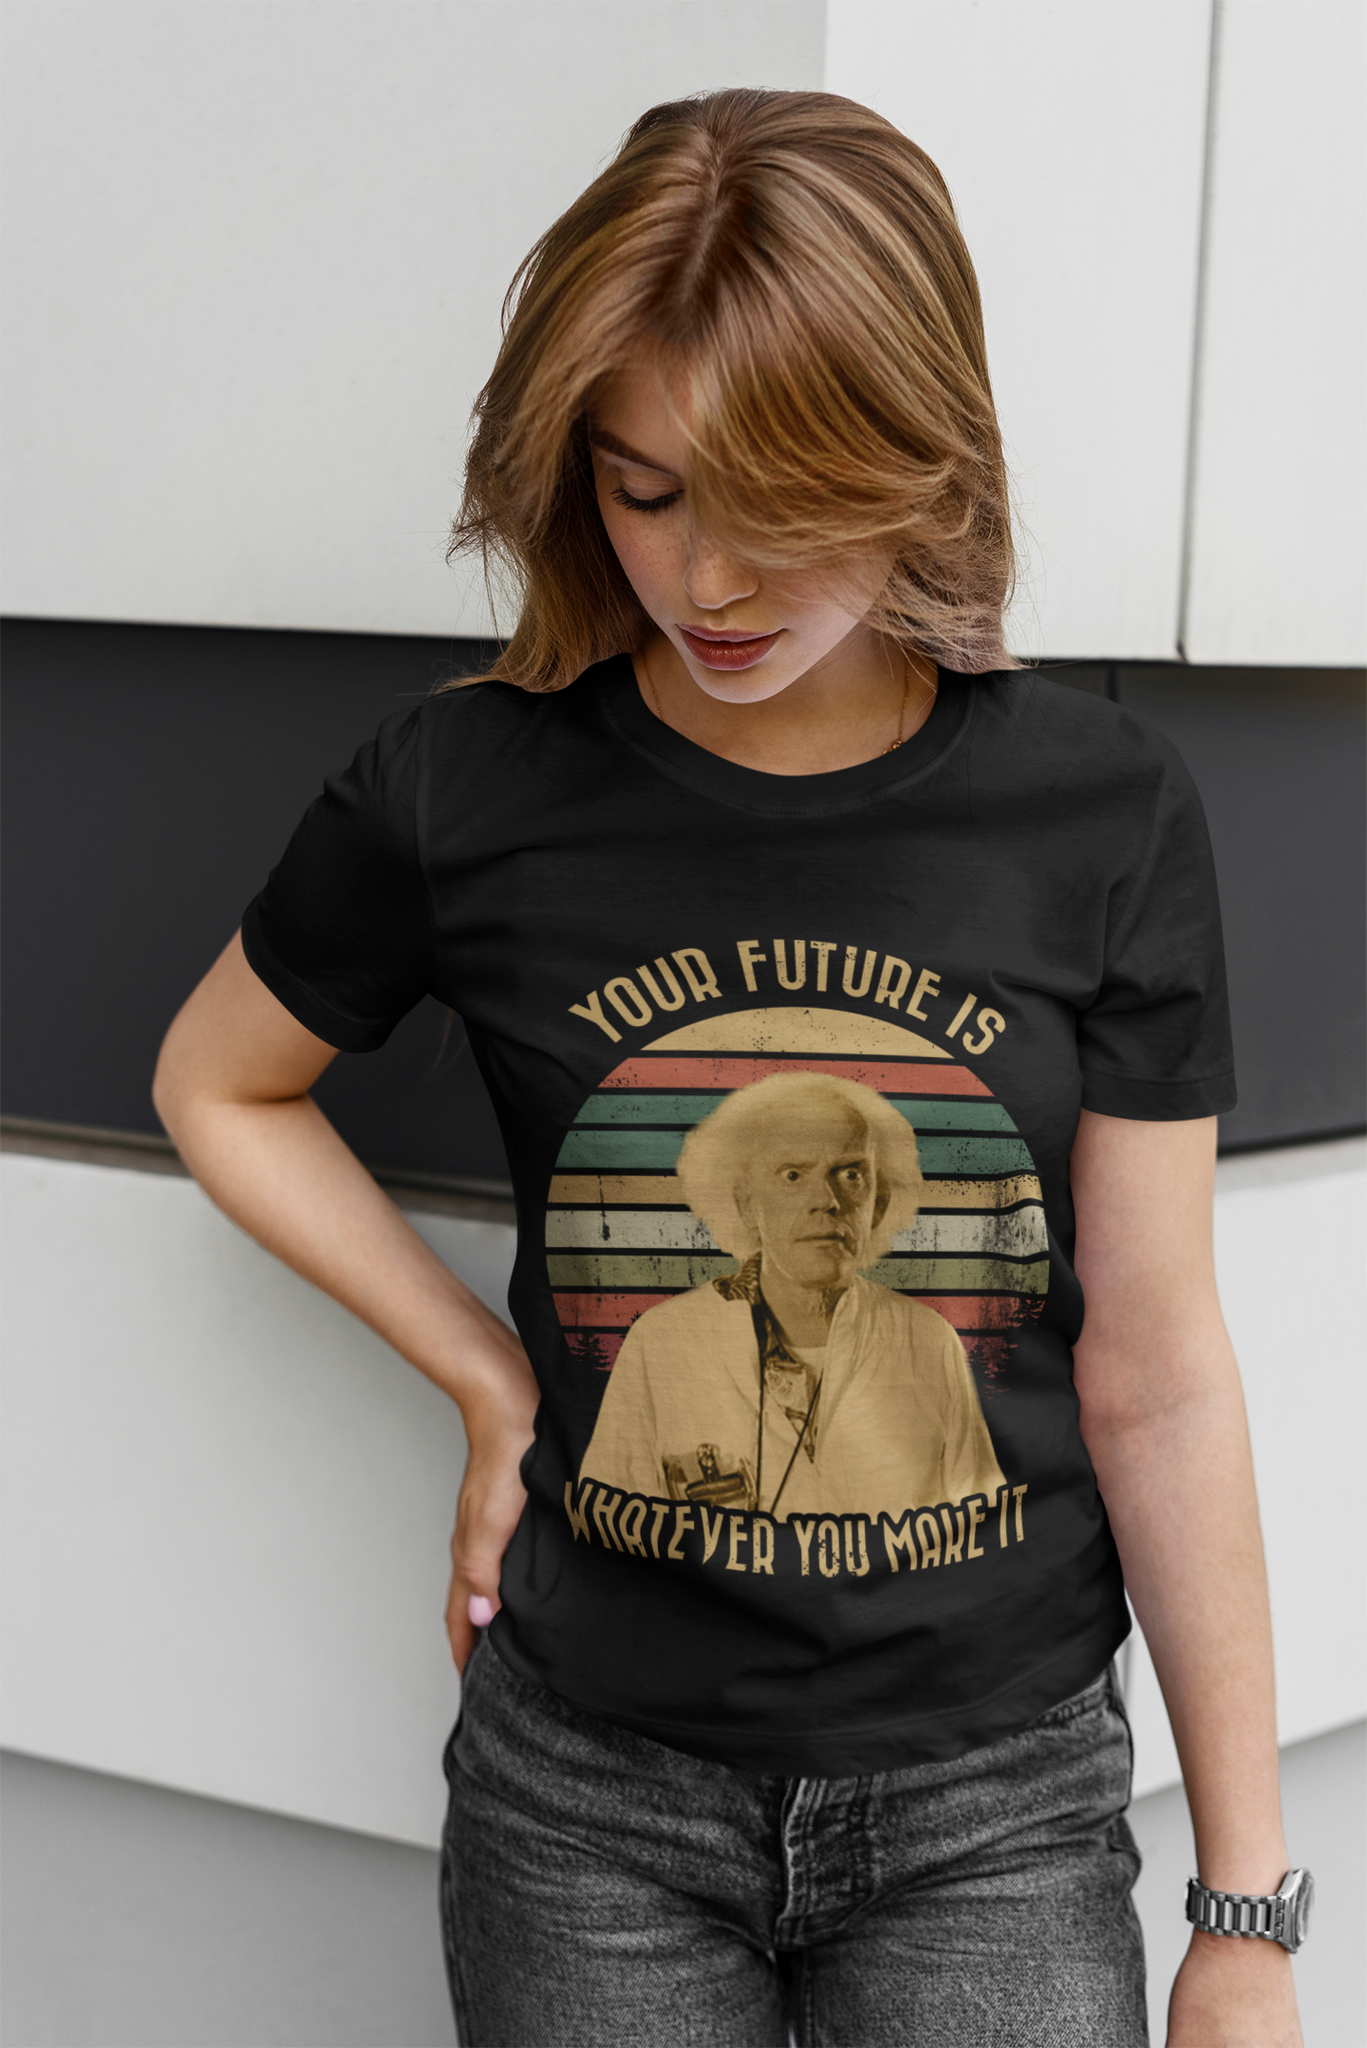 Back To The Future Vintage T Shirt, Your Future Is Whatever You Make It Tshirt, Doc Brown T Shirt